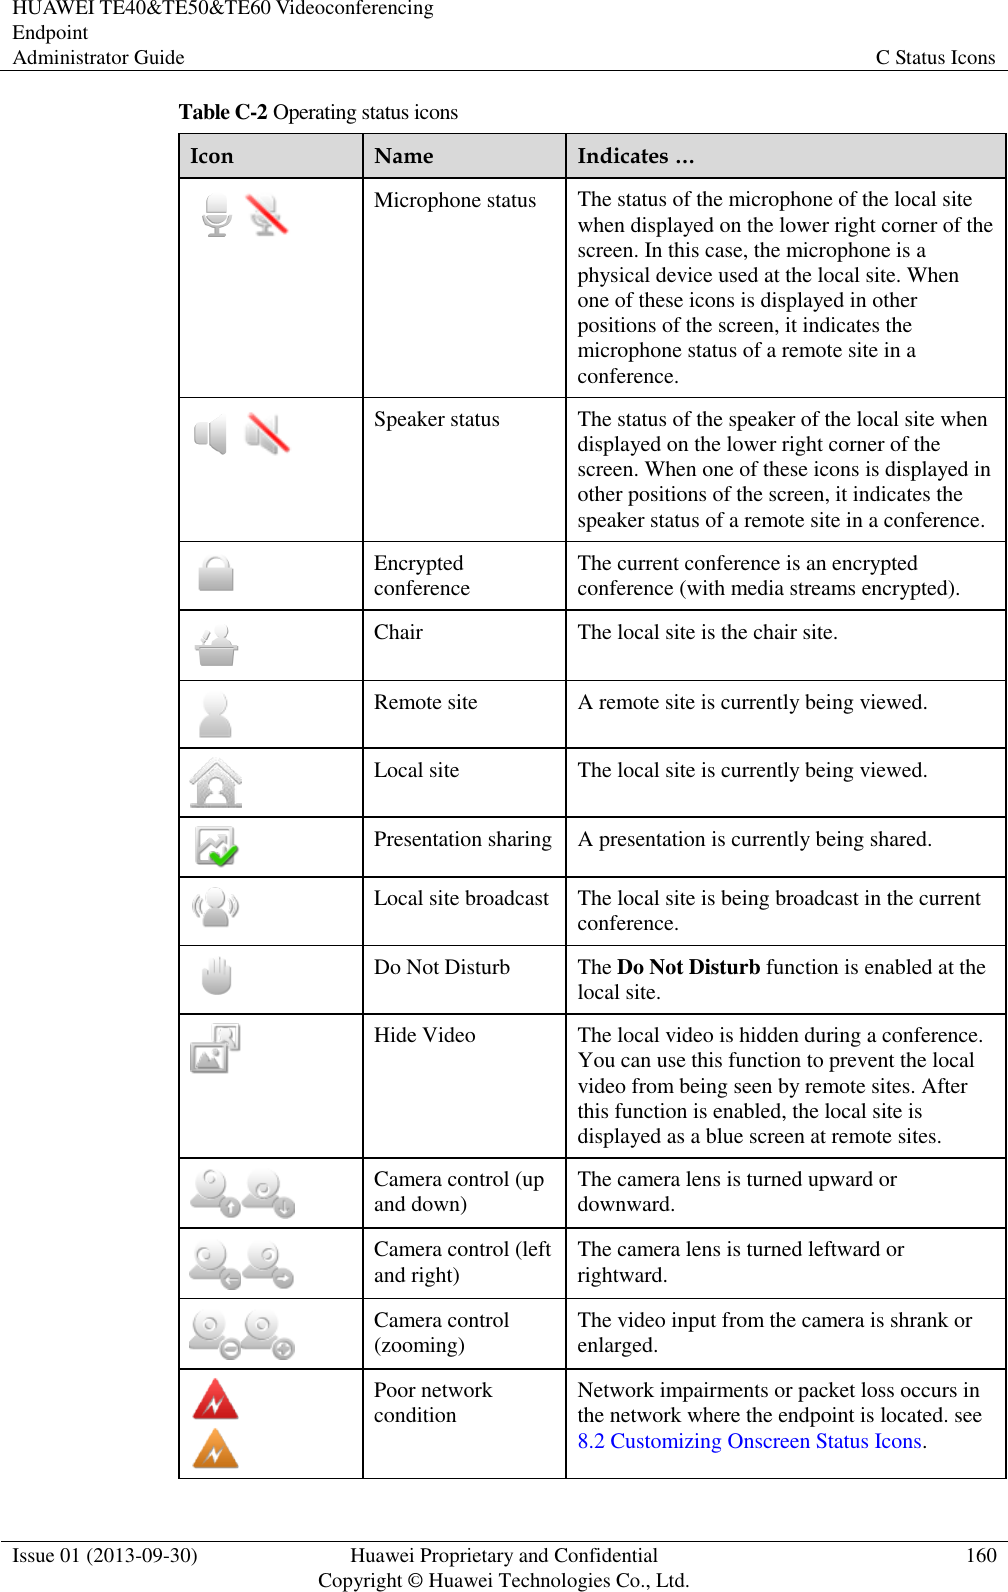 HUAWEI TE40&amp;TE50&amp;TE60 Videoconferencing Endpoint Administrator Guide C Status Icons  Issue 01 (2013-09-30) Huawei Proprietary and Confidential                                     Copyright © Huawei Technologies Co., Ltd. 160  Table C-2 Operating status icons Icon Name Indicates …  Microphone status The status of the microphone of the local site when displayed on the lower right corner of the screen. In this case, the microphone is a physical device used at the local site. When one of these icons is displayed in other positions of the screen, it indicates the microphone status of a remote site in a conference.  Speaker status The status of the speaker of the local site when displayed on the lower right corner of the screen. When one of these icons is displayed in other positions of the screen, it indicates the speaker status of a remote site in a conference.  Encrypted conference The current conference is an encrypted conference (with media streams encrypted).  Chair The local site is the chair site.  Remote site A remote site is currently being viewed.  Local site The local site is currently being viewed.  Presentation sharing A presentation is currently being shared.  Local site broadcast The local site is being broadcast in the current conference.  Do Not Disturb The Do Not Disturb function is enabled at the local site.  Hide Video The local video is hidden during a conference. You can use this function to prevent the local video from being seen by remote sites. After this function is enabled, the local site is displayed as a blue screen at remote sites.  Camera control (up and down) The camera lens is turned upward or downward.  Camera control (left and right) The camera lens is turned leftward or rightward.  Camera control (zooming) The video input from the camera is shrank or enlarged.   Poor network condition Network impairments or packet loss occurs in the network where the endpoint is located. see 8.2 Customizing Onscreen Status Icons. 